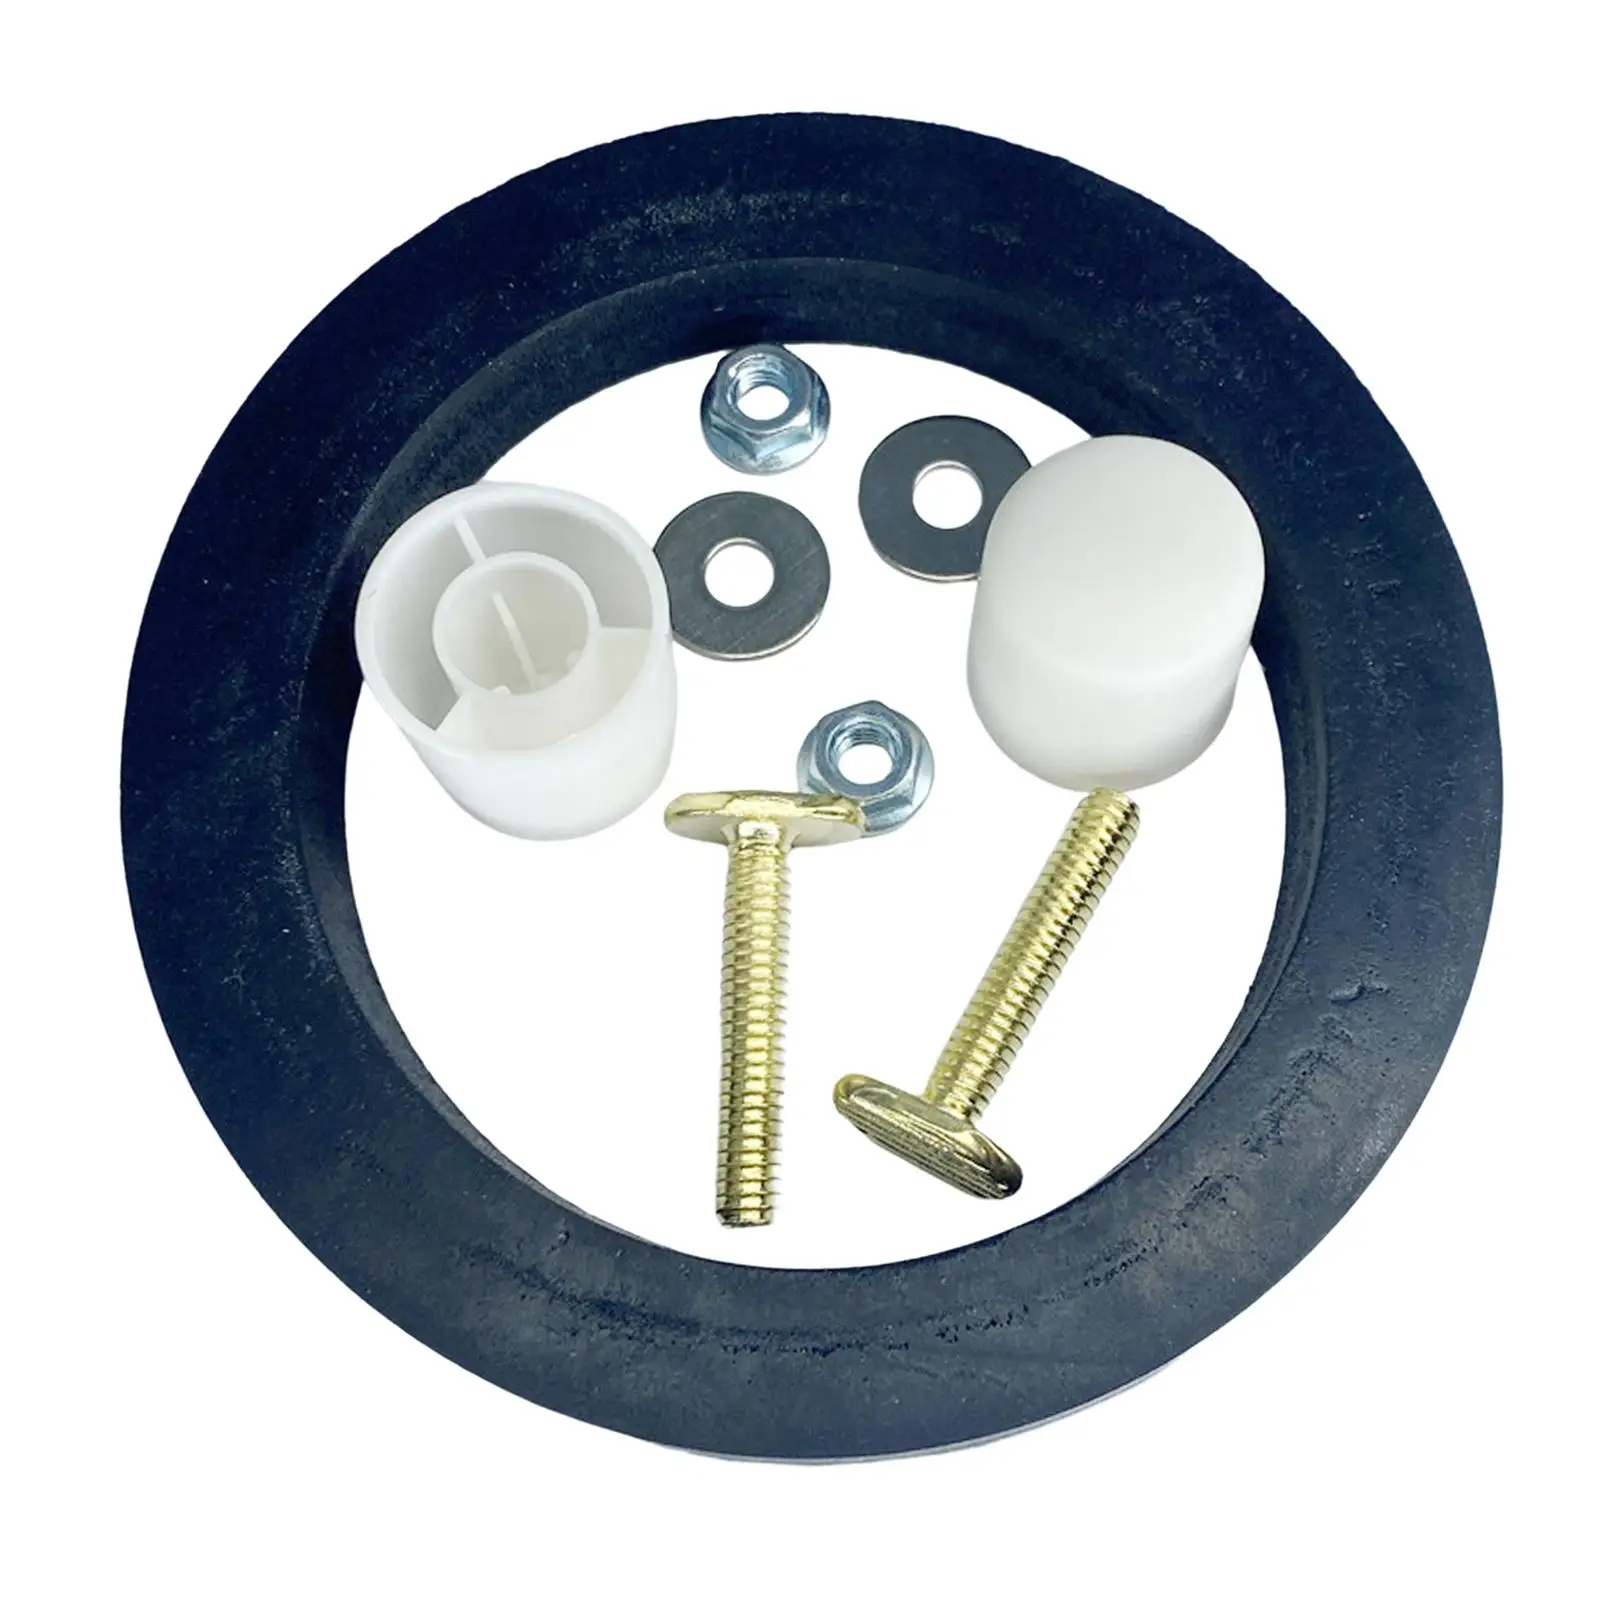 Seal Gasket of RV Toilet for Toilet Simple Installation Flush Ball Seal